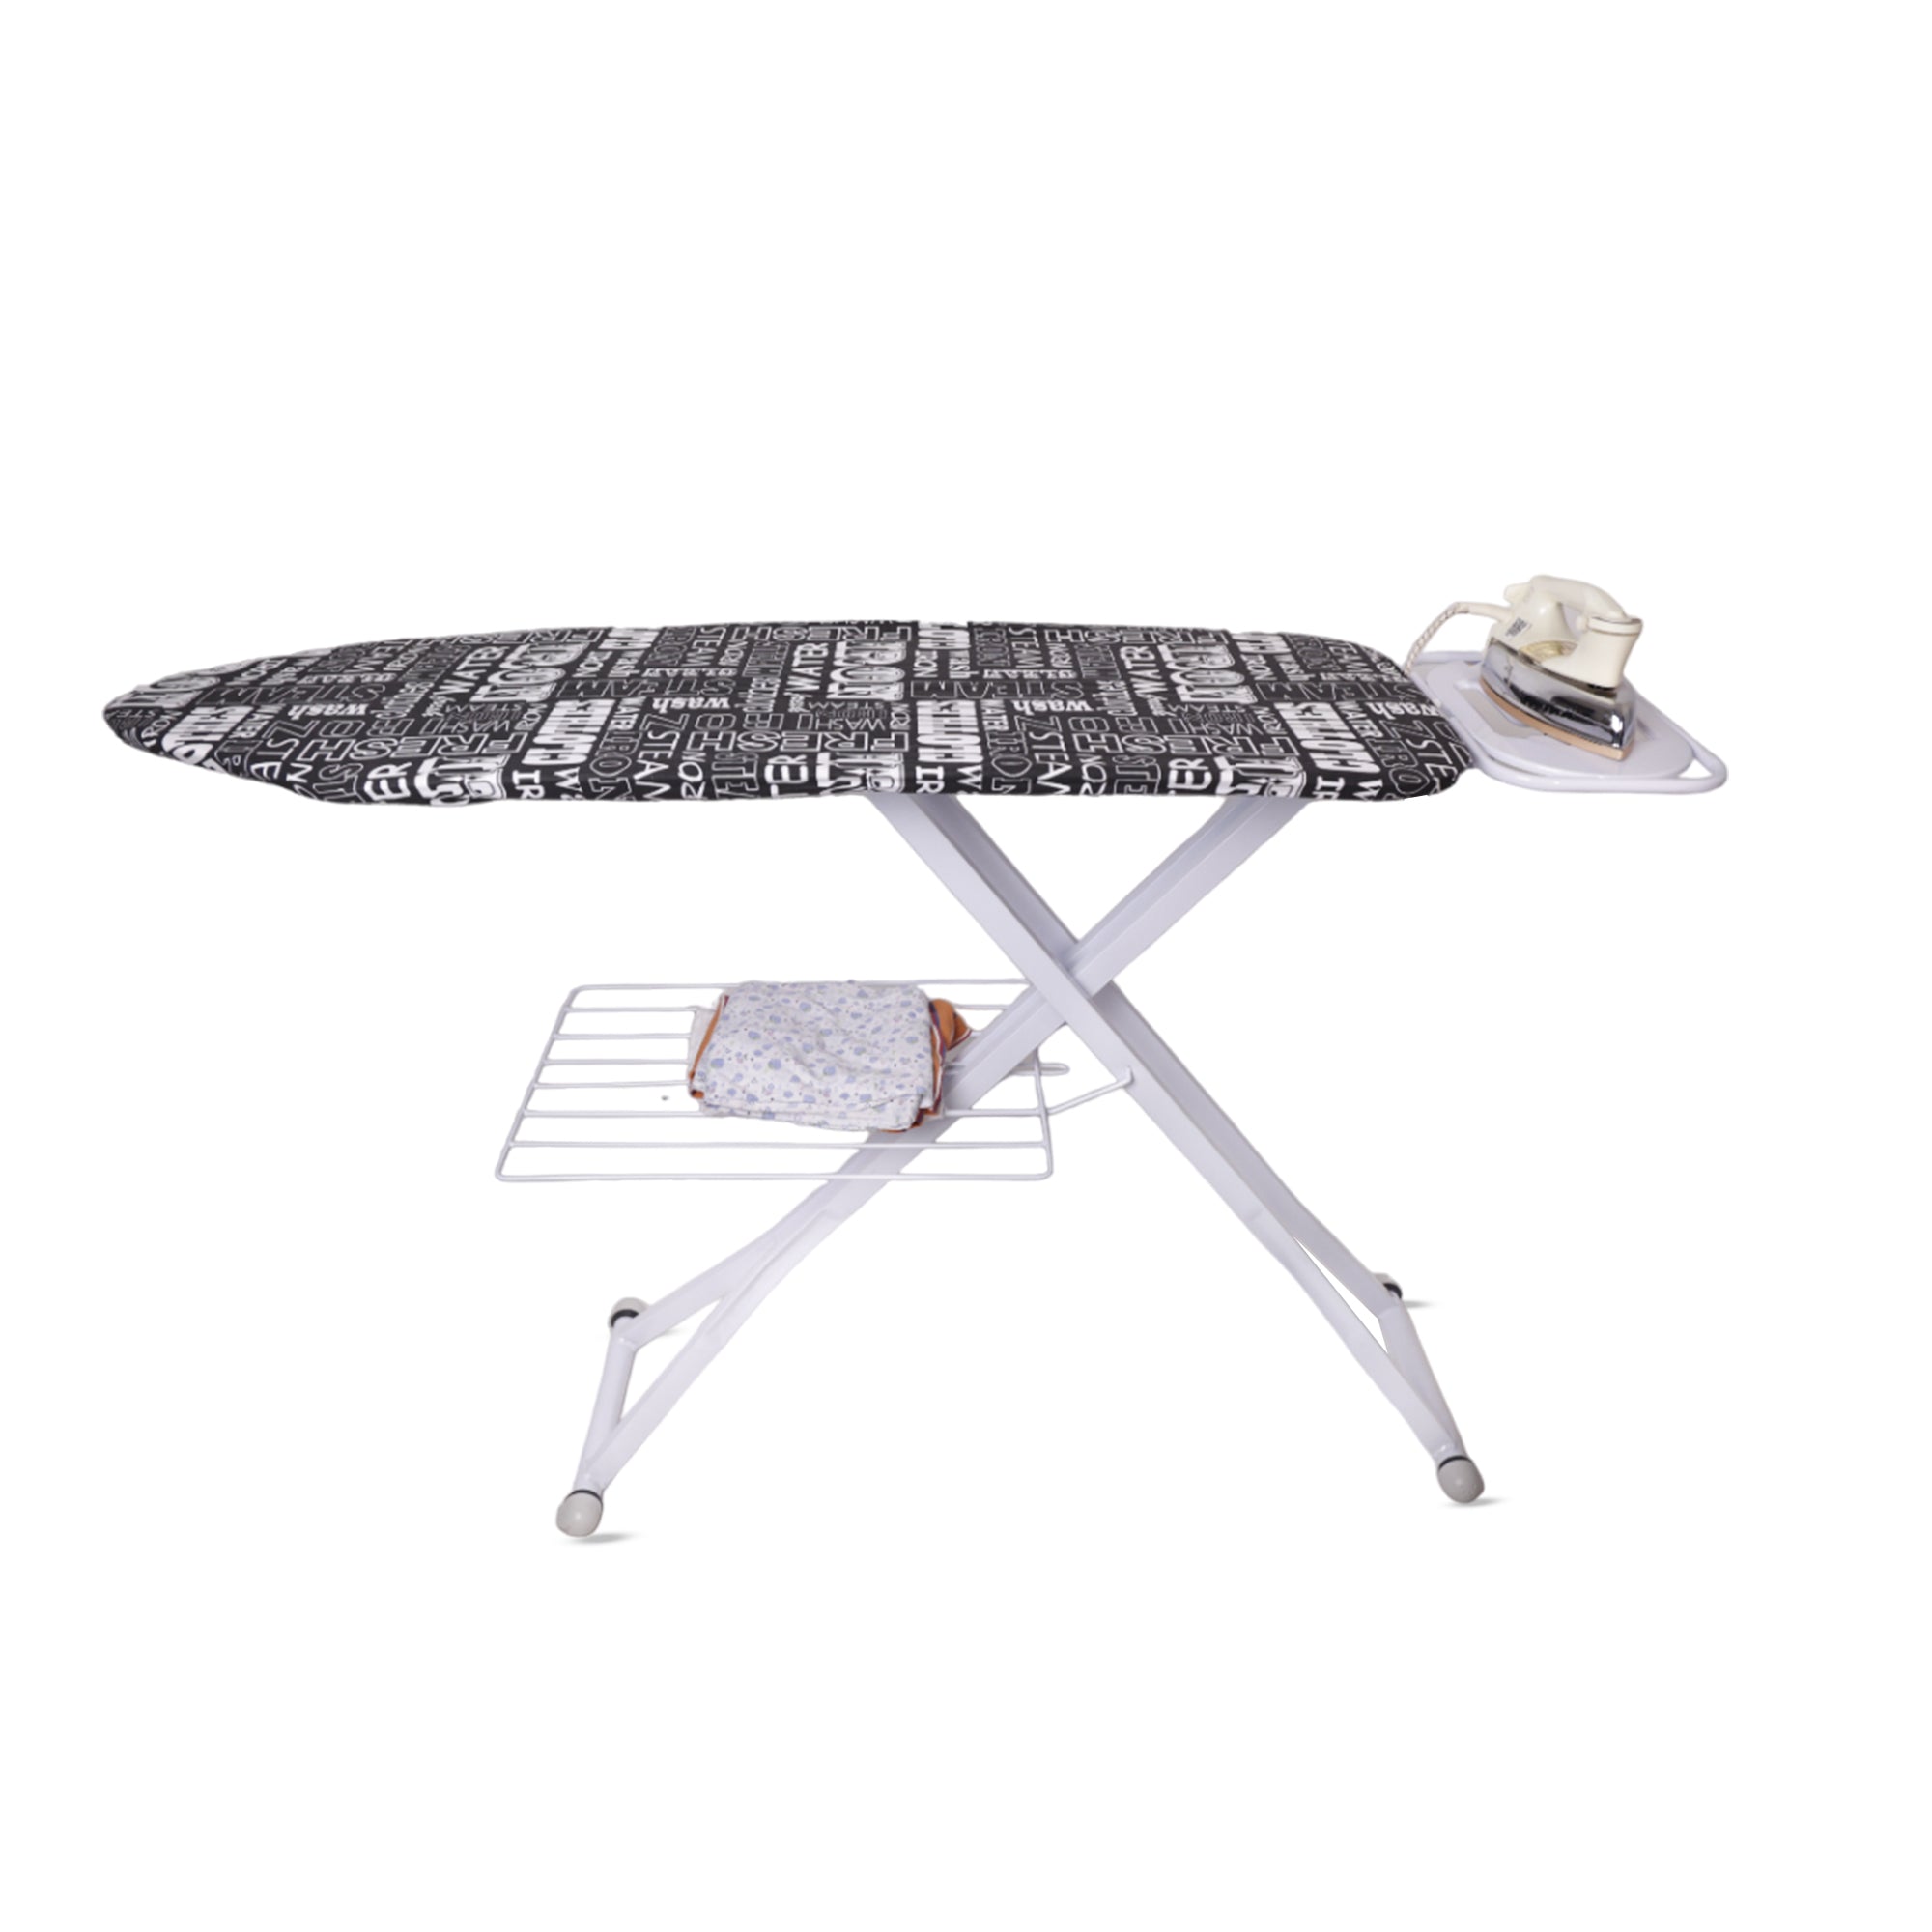 Tallinn Ironing Board | Ironing Board Maxima with Silicone Iron Rest & Silicon Stopper | Height Adjustable | Black